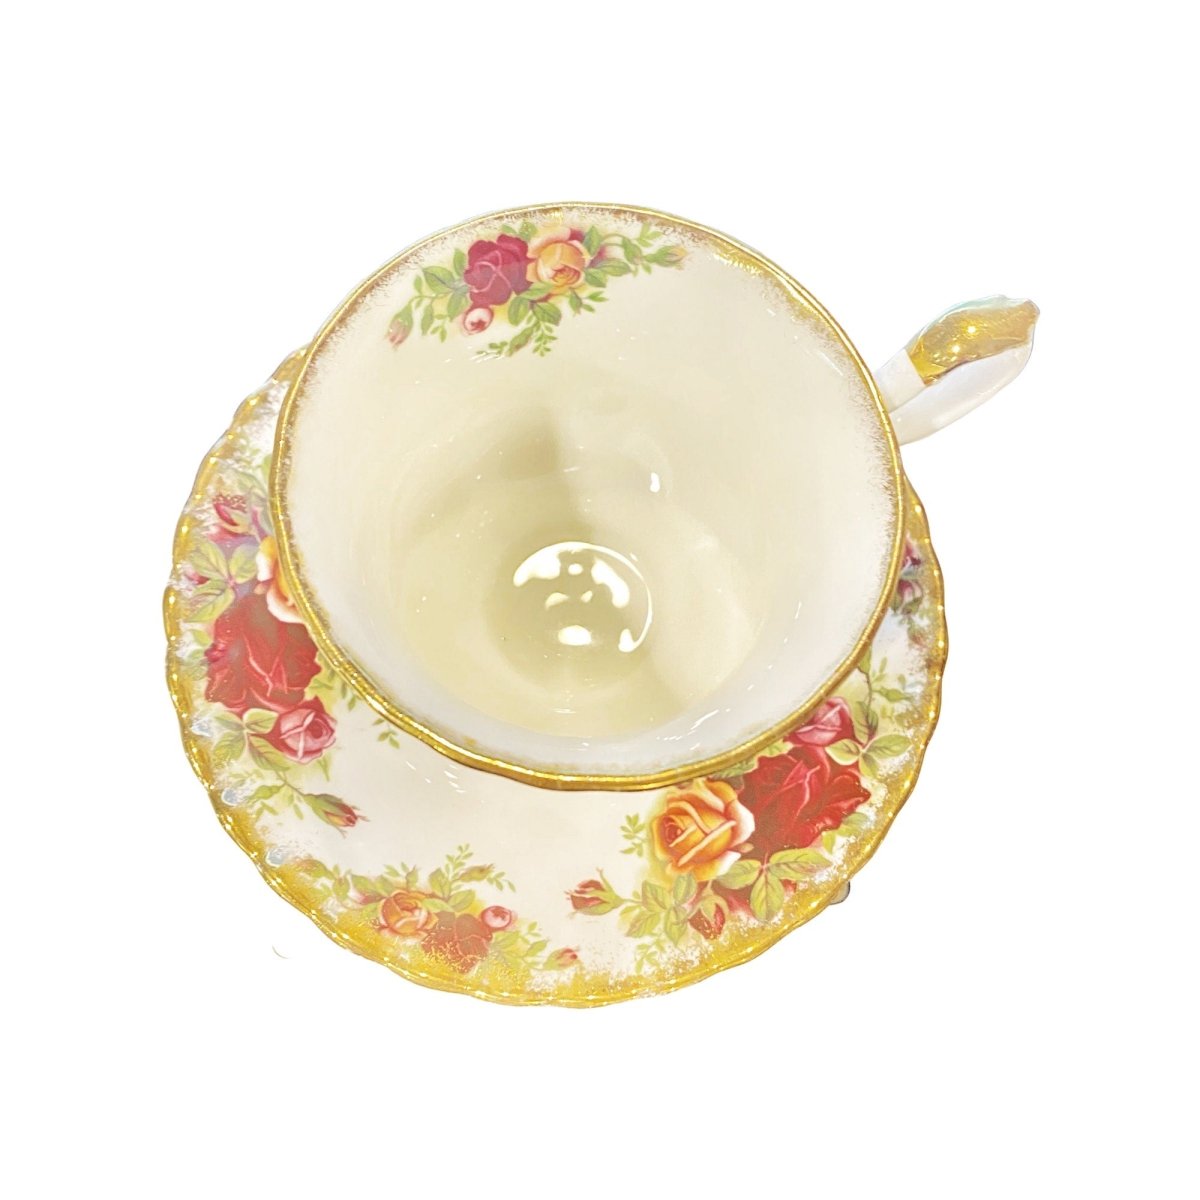 Royal Stafford | Old Country Roses | teacup & saucer, English classic porcelain for Vintage tea Parties, Mix and Match Teacups - Chinamania.shop